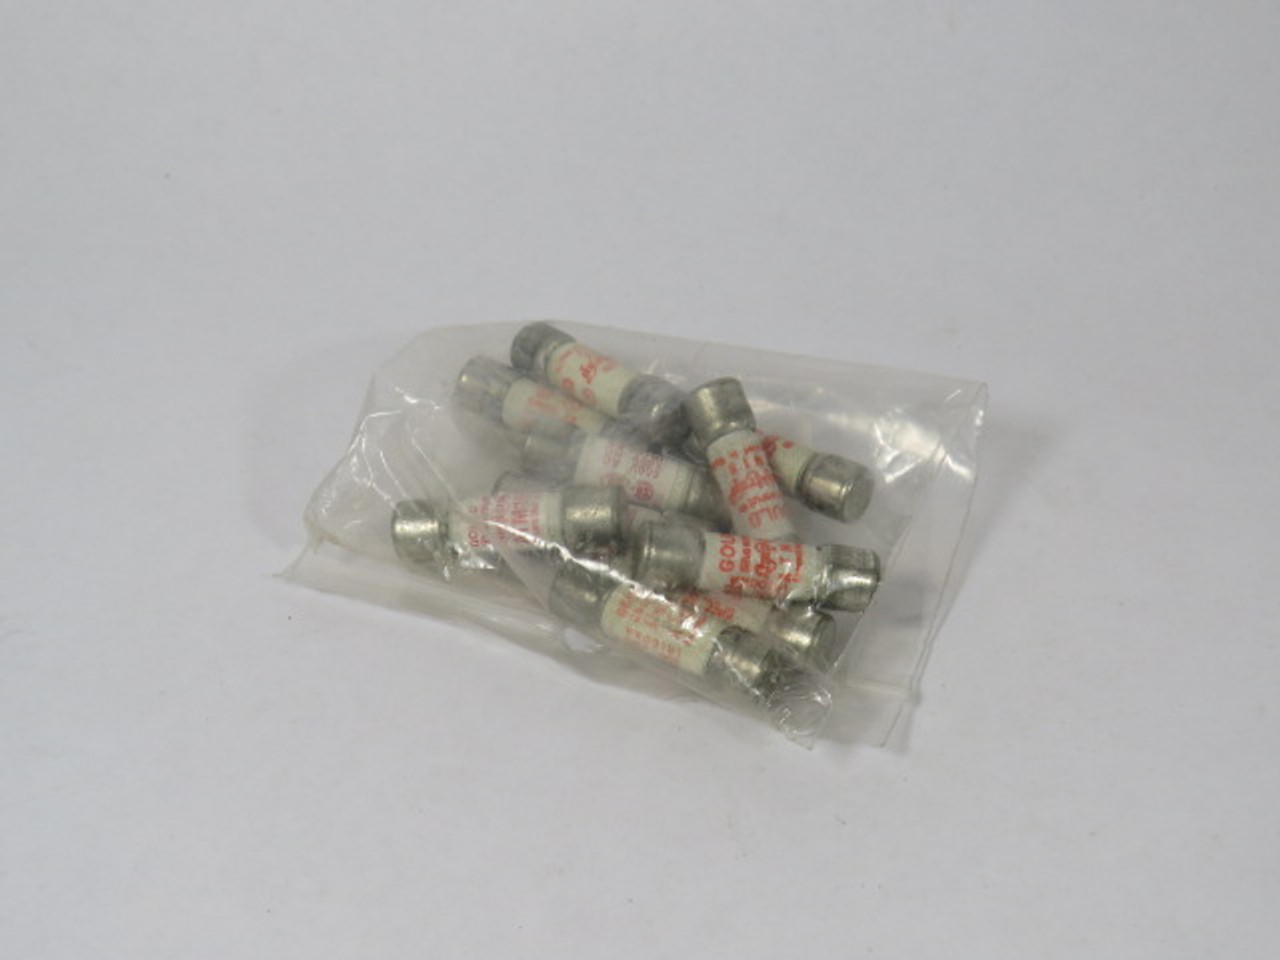 Gould Shawmut ATM15 Fuse 15A 600V Lot of 10 USED